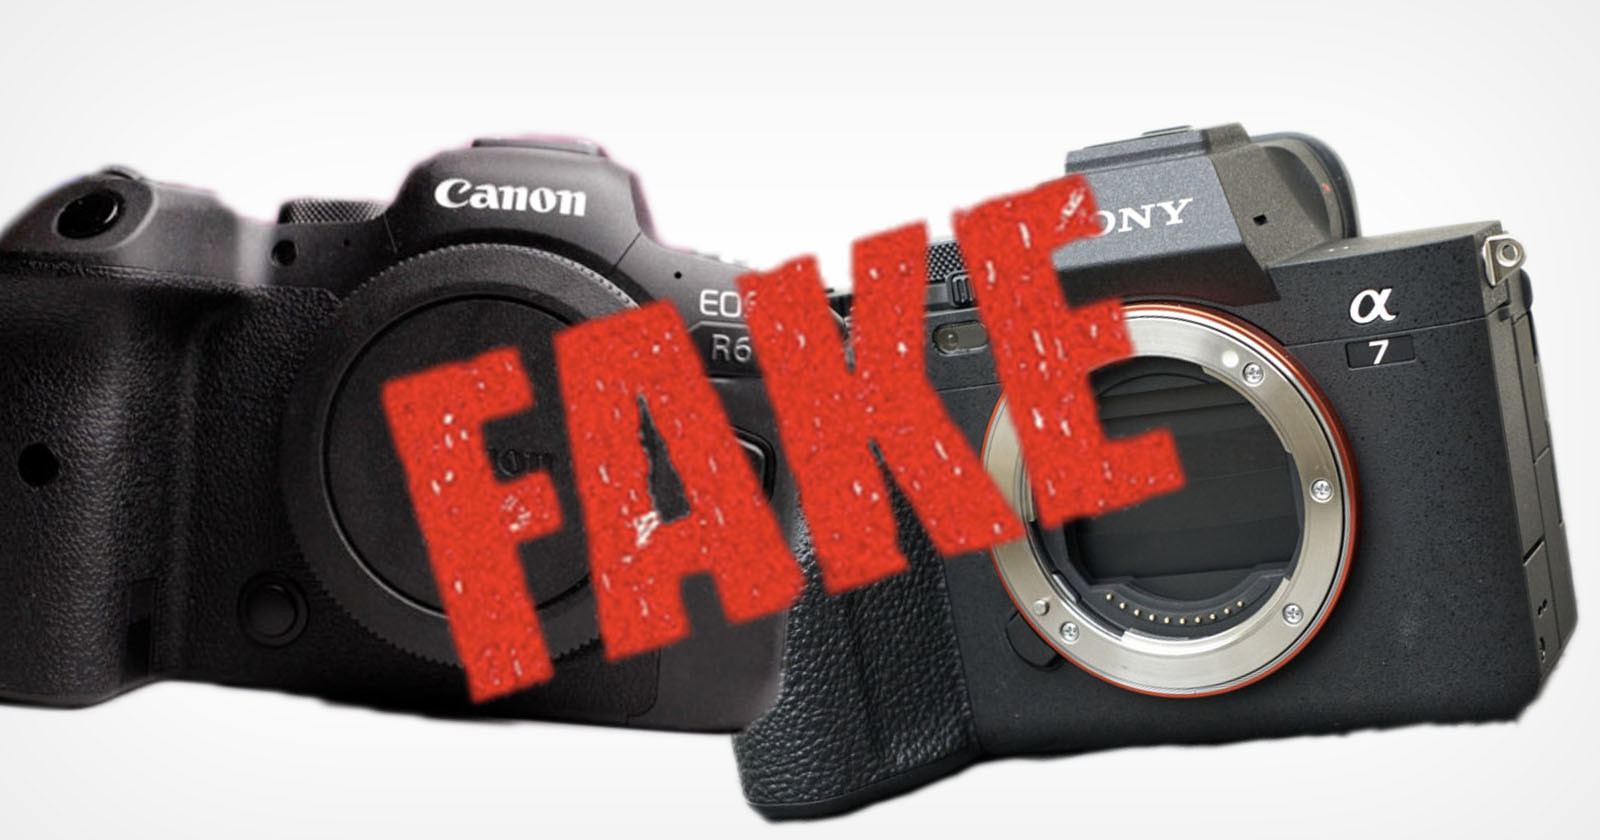 The Sony Alpha 7R IV Has the Highest Number of Fake Reviews